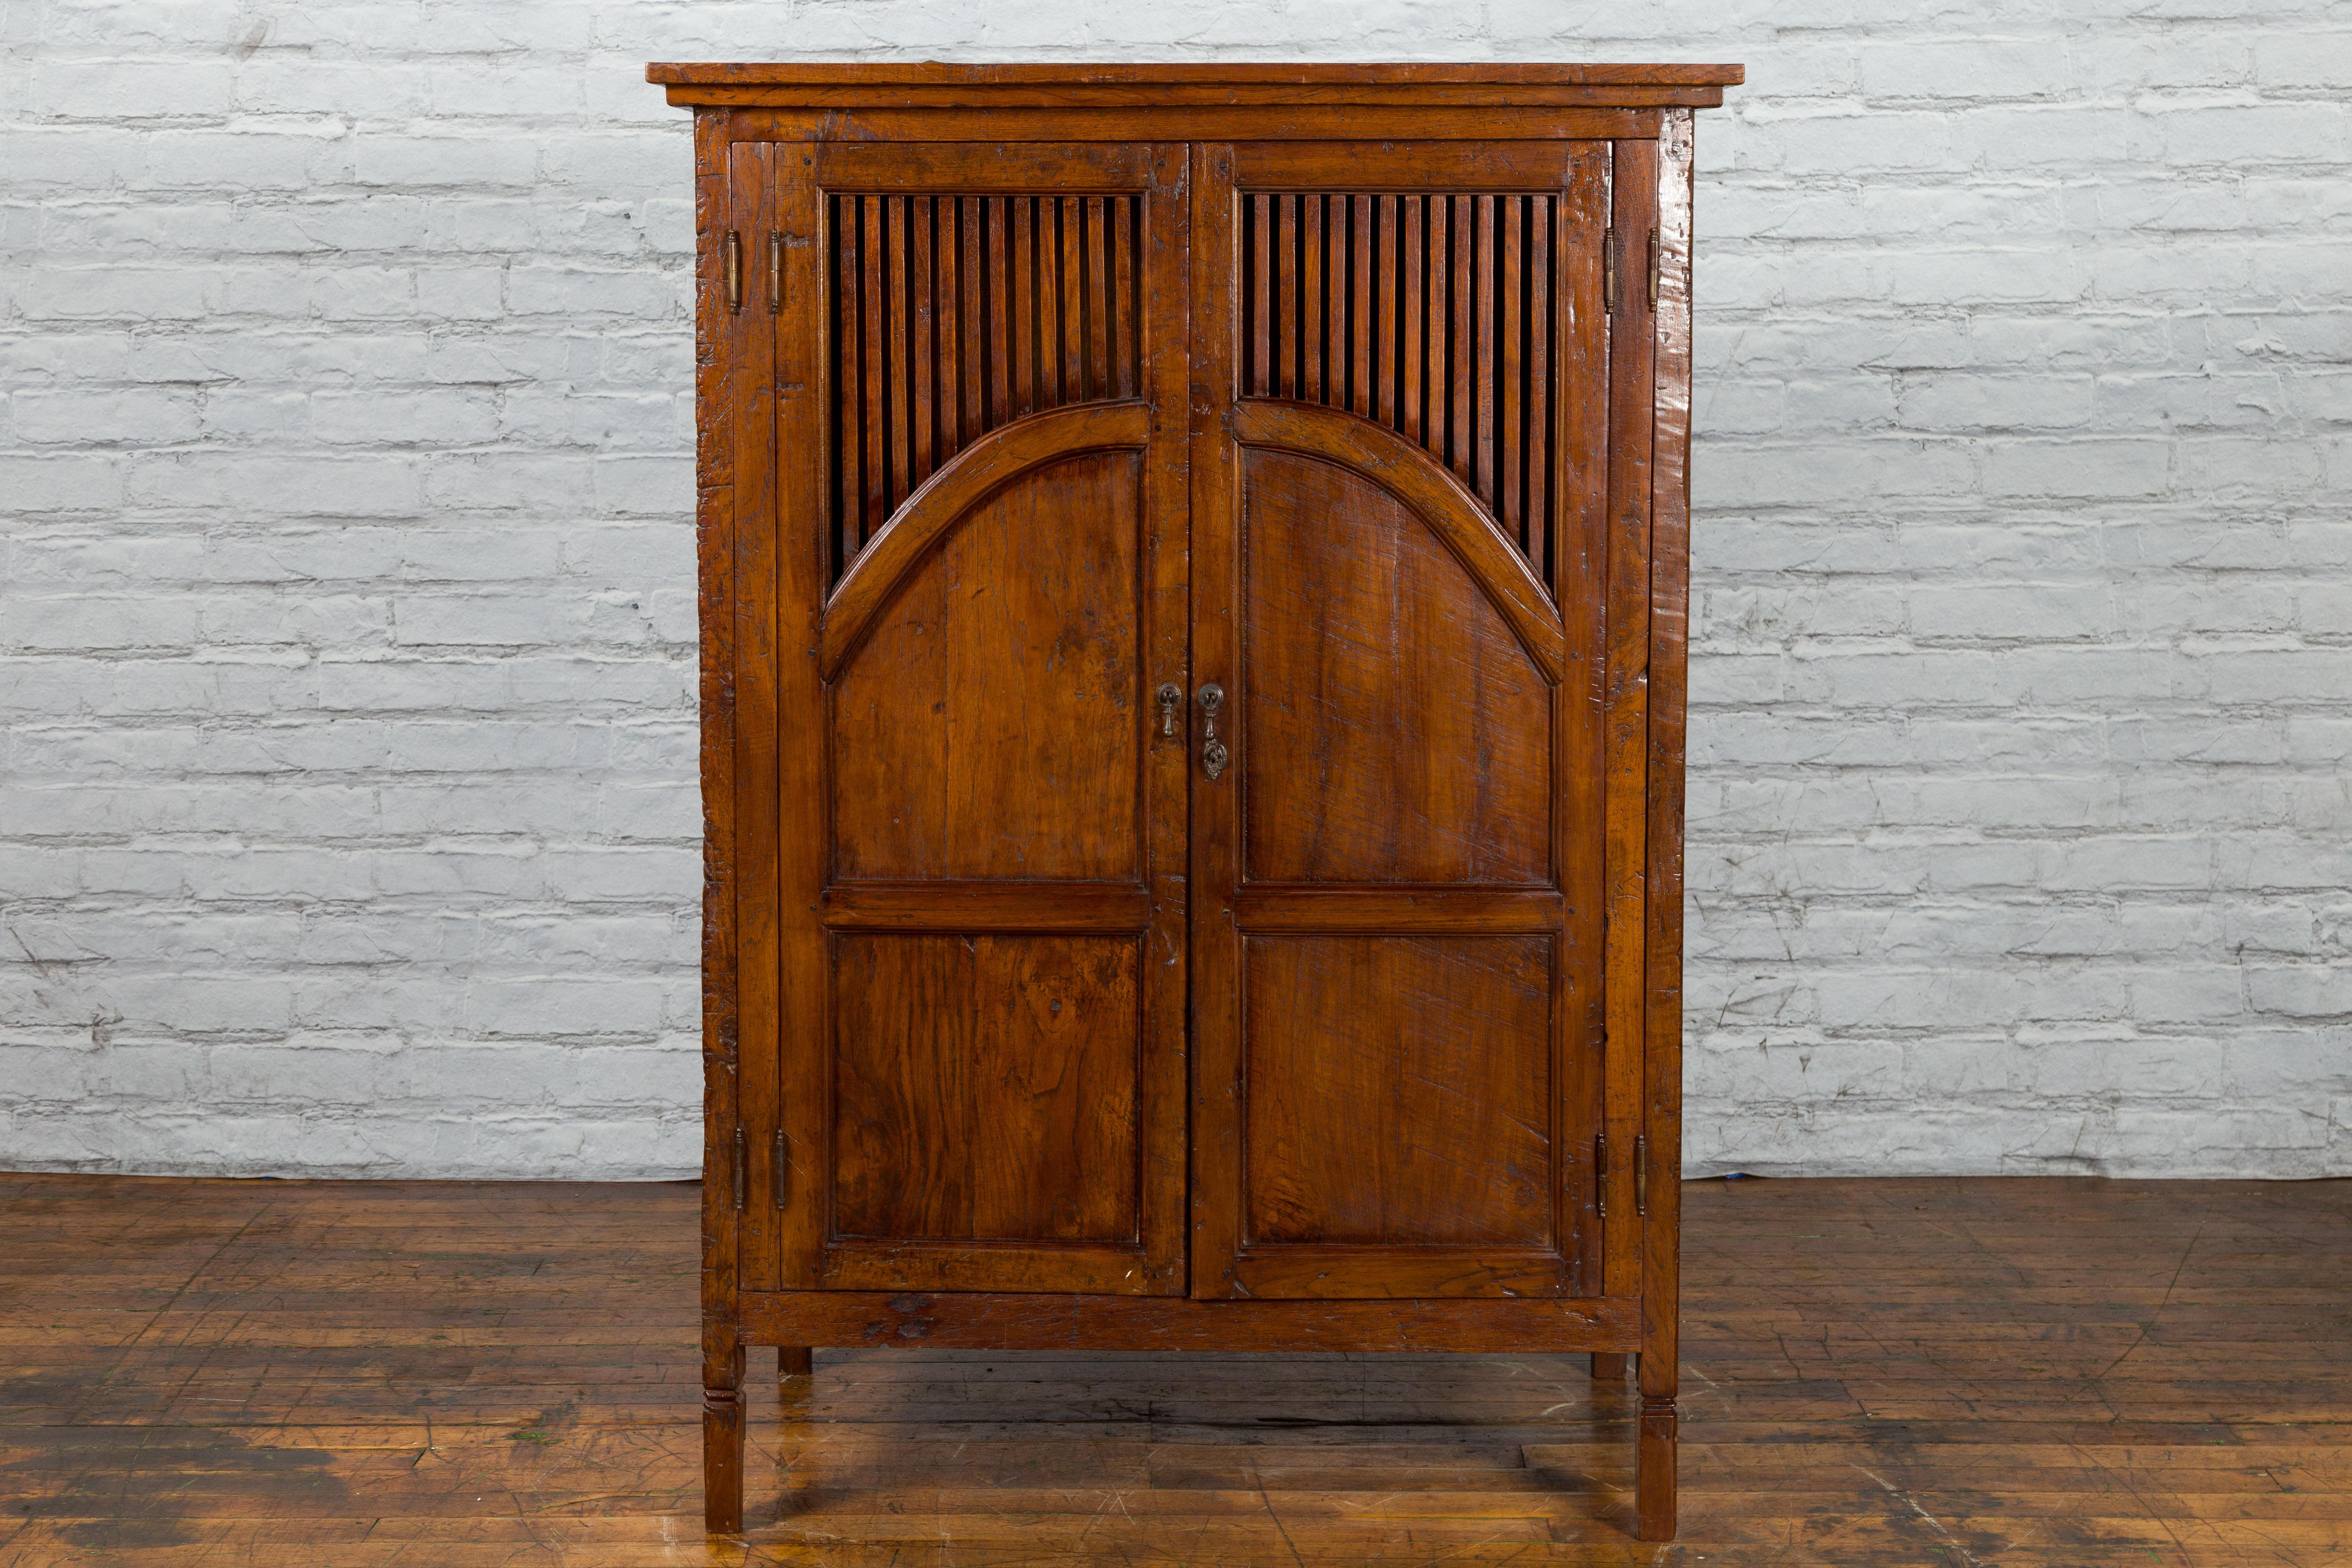 An antique Javanese hand-carved teak armoire from the early 20th century, with slatted motifs, slightly carved legs and nice patina. Created on the island of Java during the early years of the 20th century, this teak wood armoire features a linear,